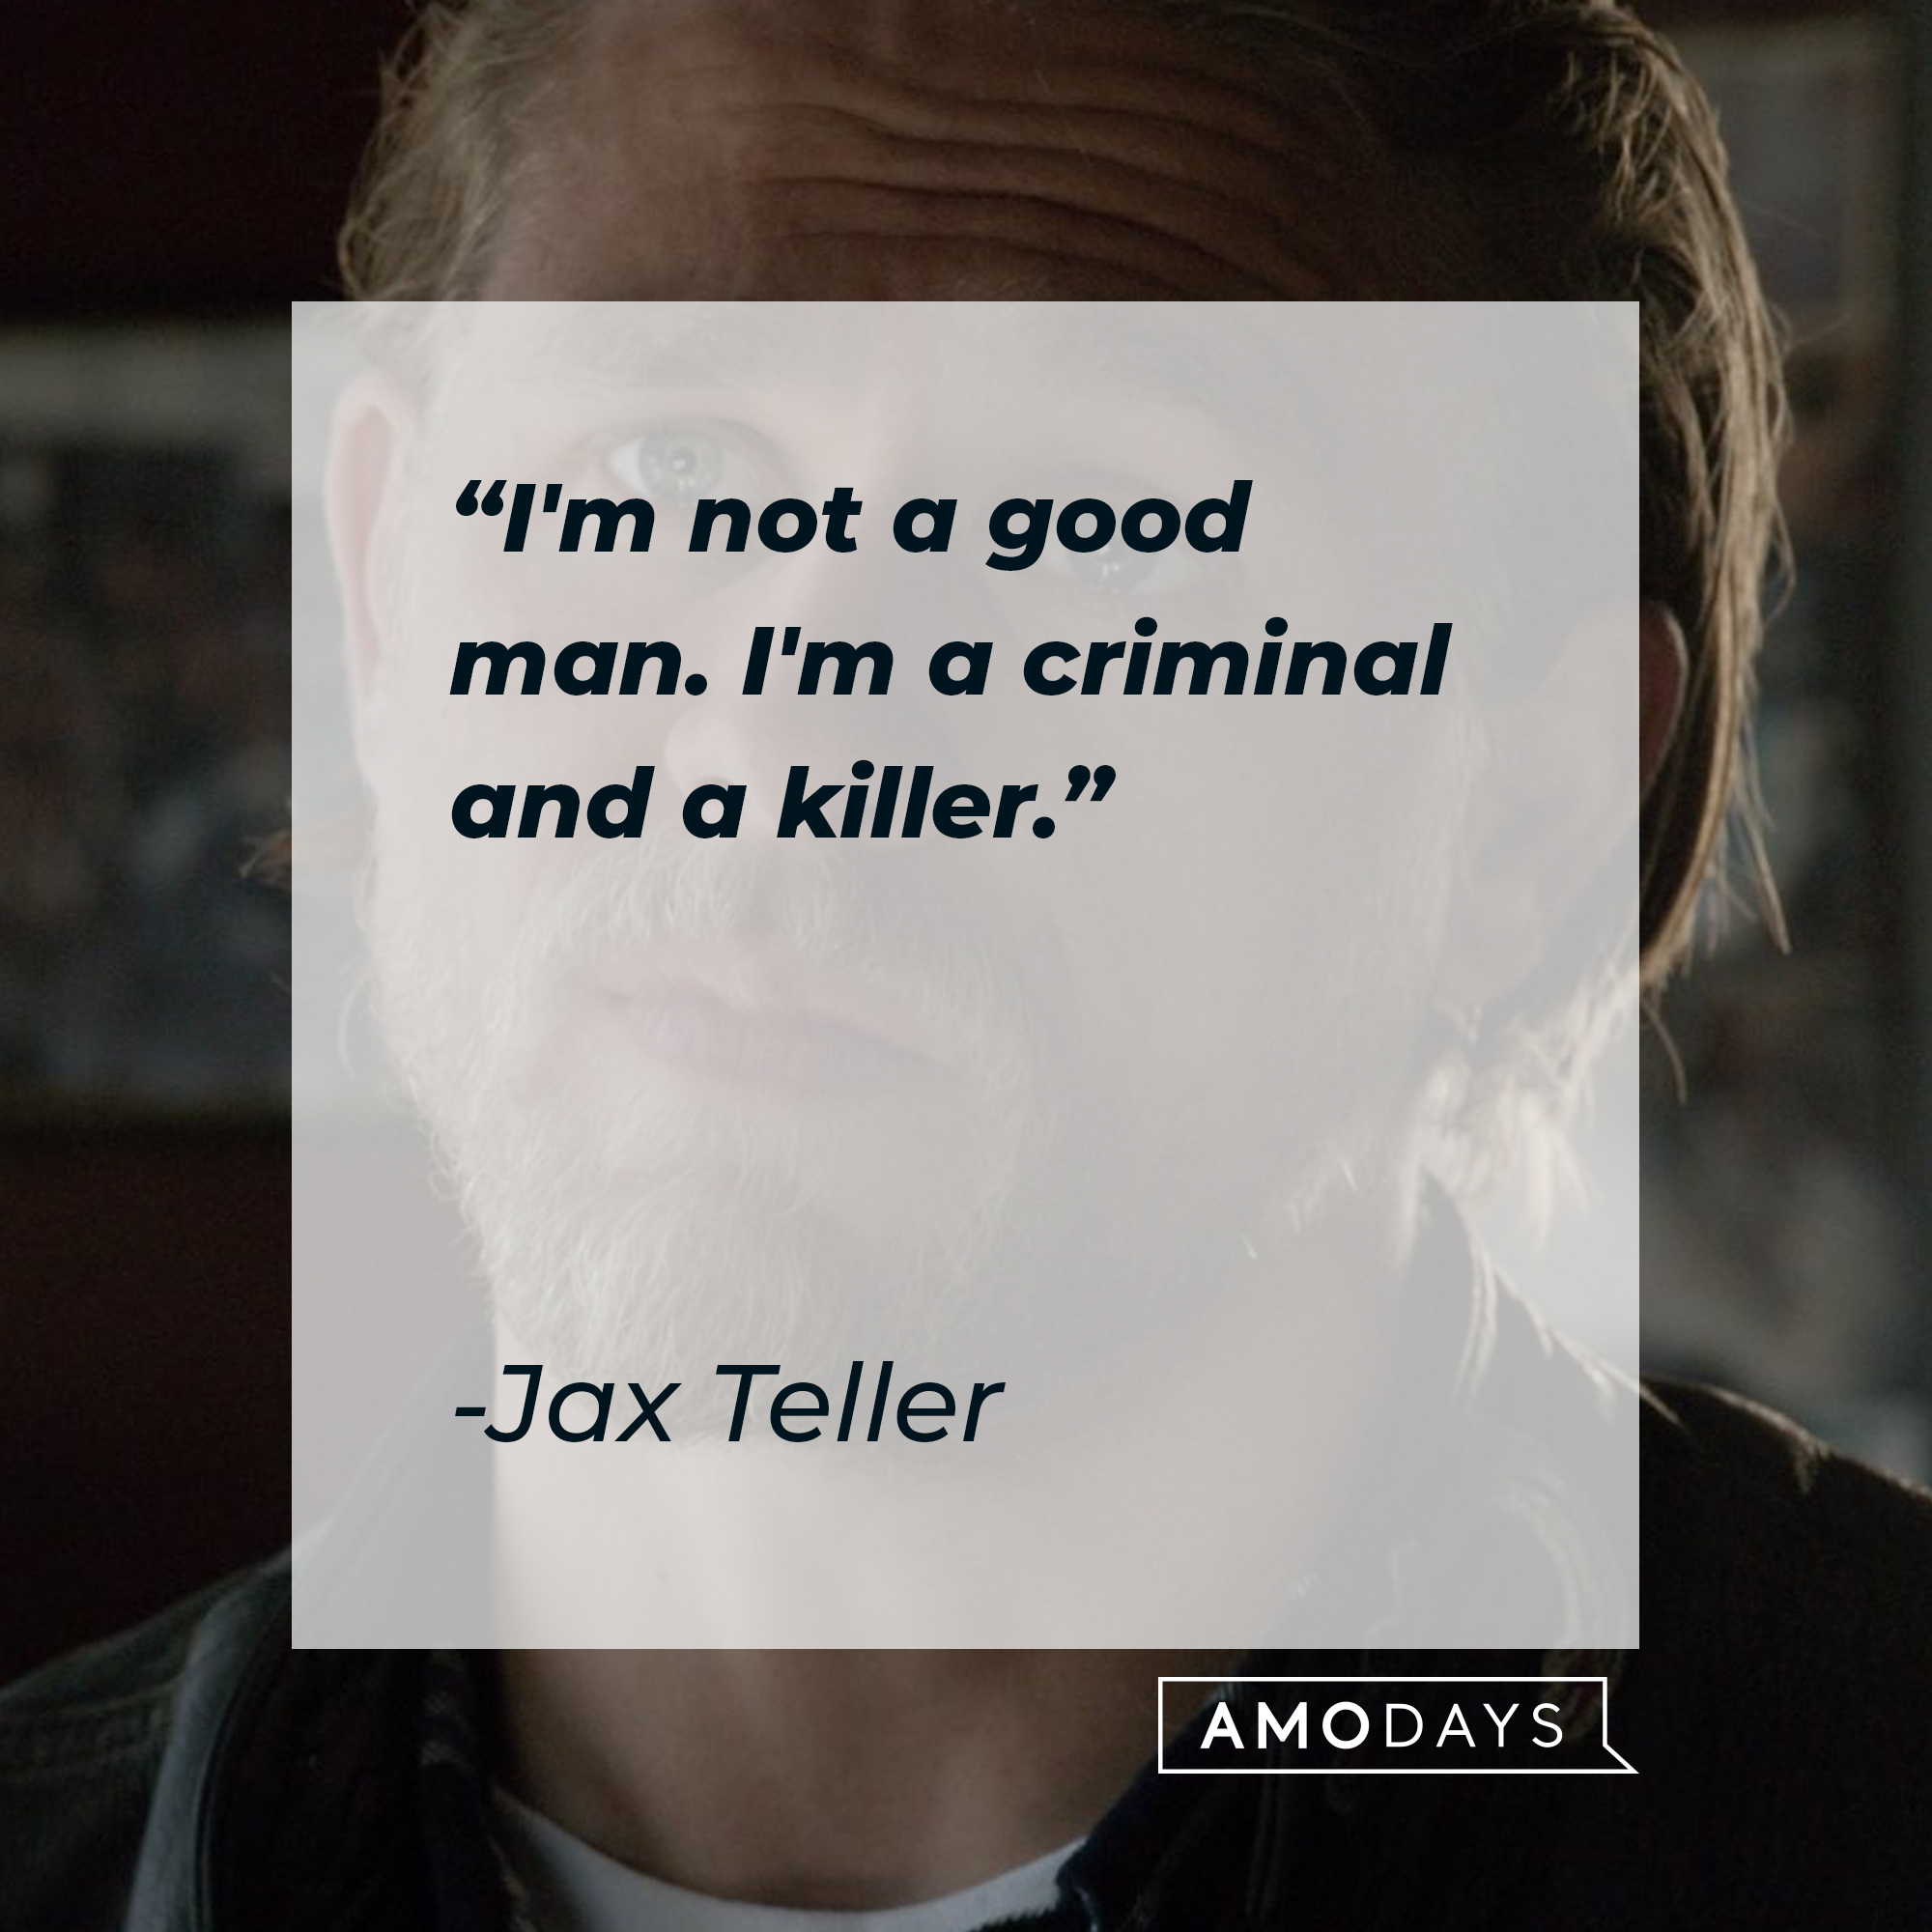 Jax Teller with his quote: “I'm not a good man. I'm a criminal and a killer.” |  Source: facebook.com/SonsofAnarchy